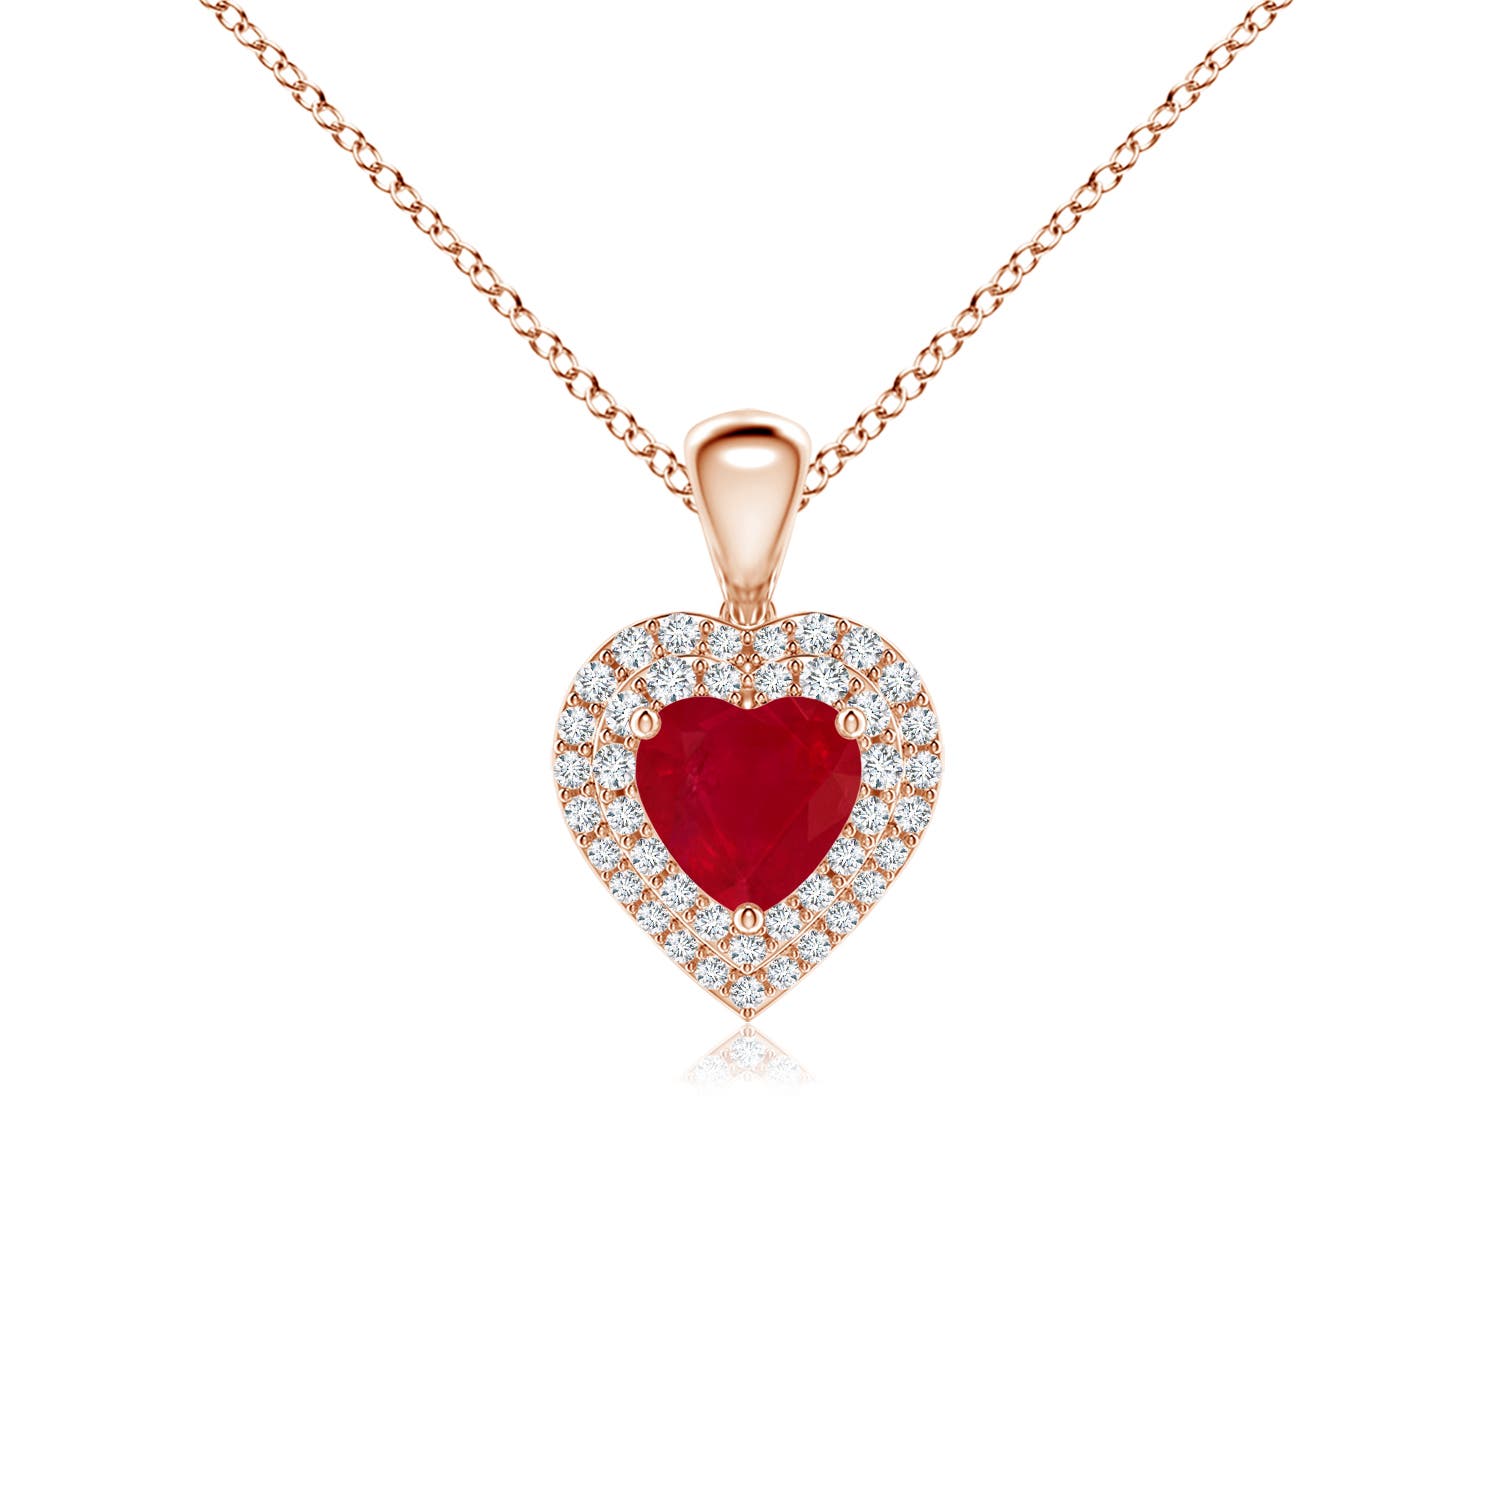 AA - Ruby / 0.94 CT / 14 KT Rose Gold